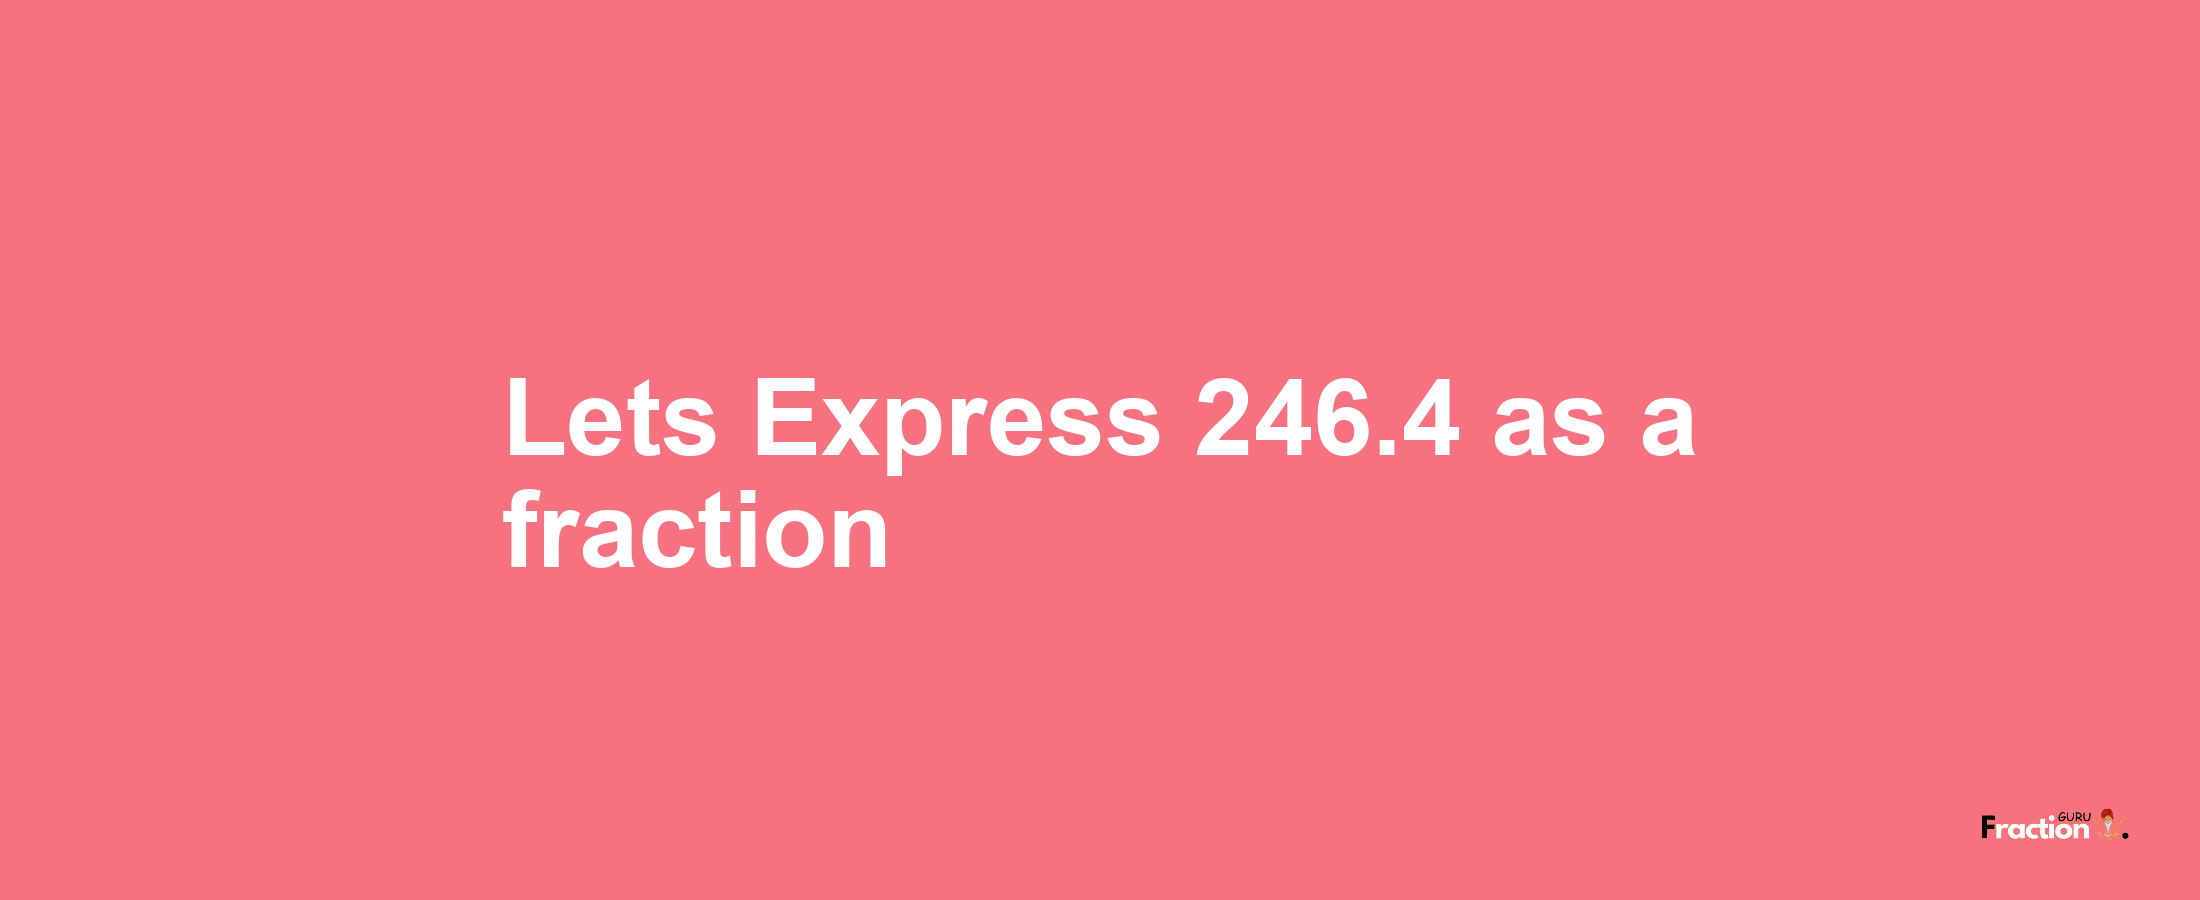 Lets Express 246.4 as afraction